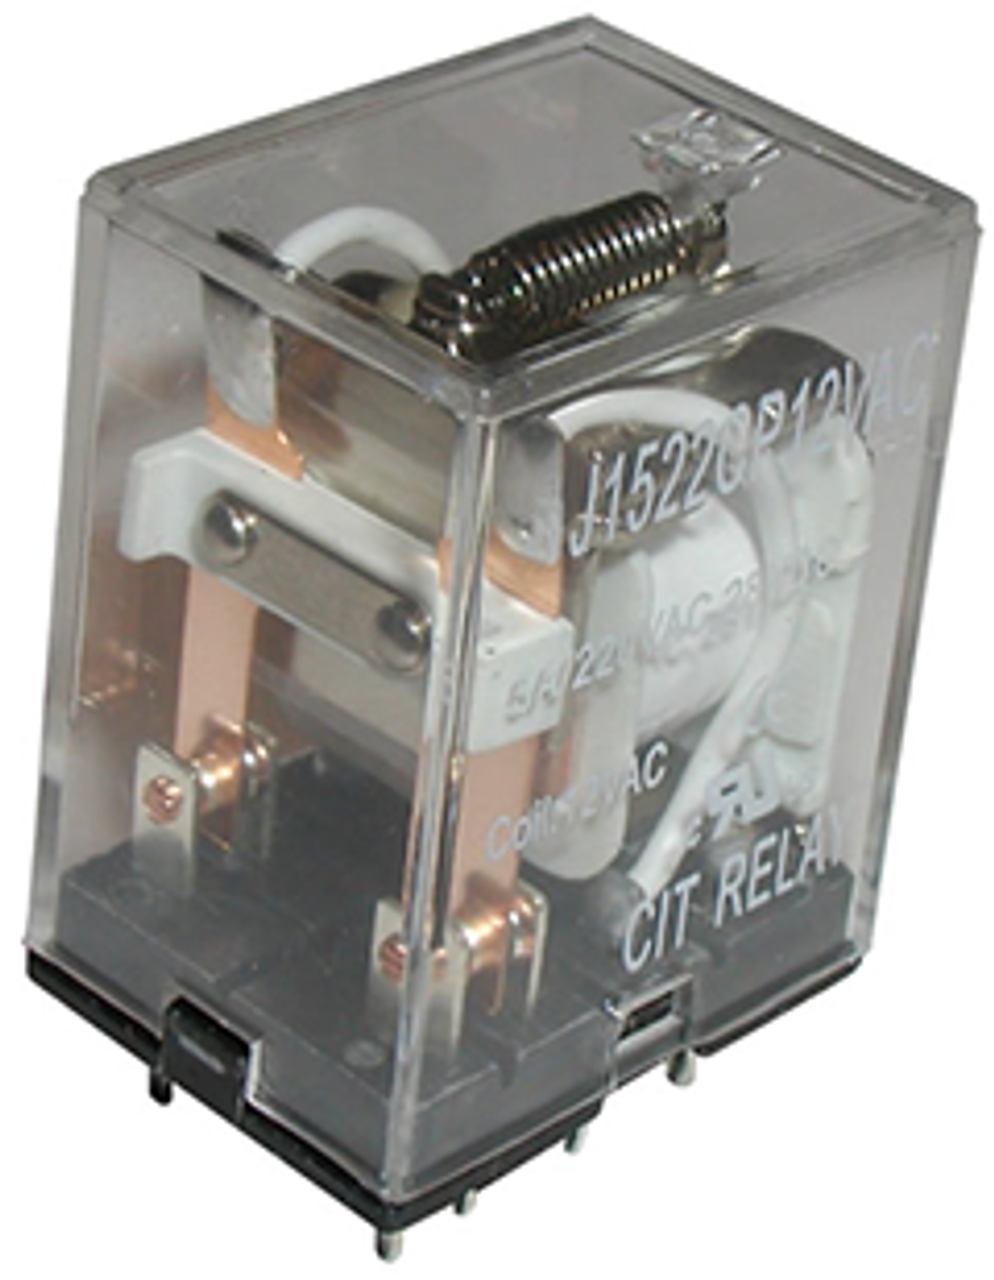 CIT Relay and Switch J1522CT110VACD Industrial Relays